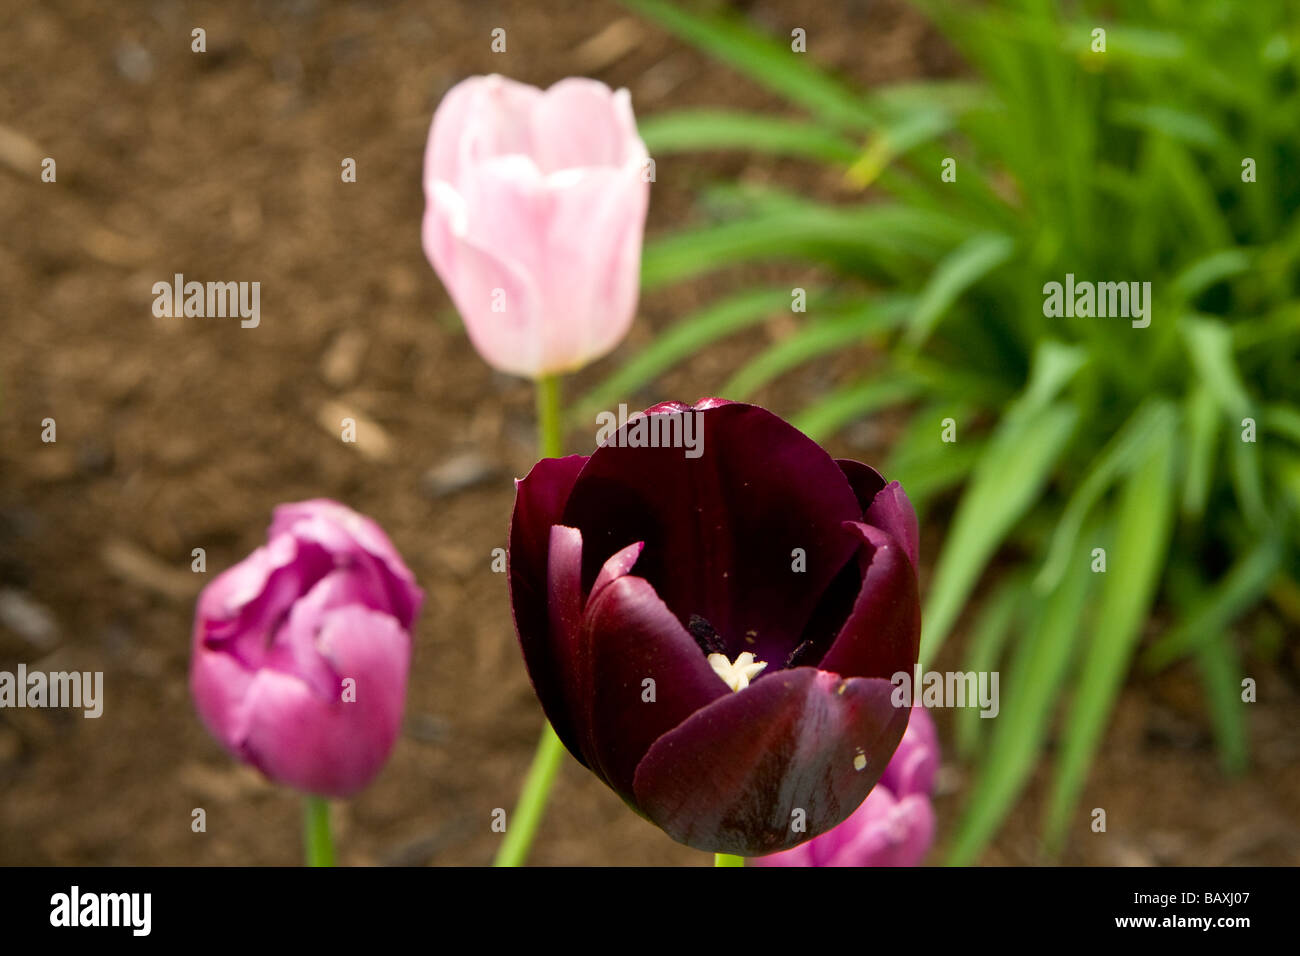 Tulips blooming in spring time Columbus Ohio Stock Photo